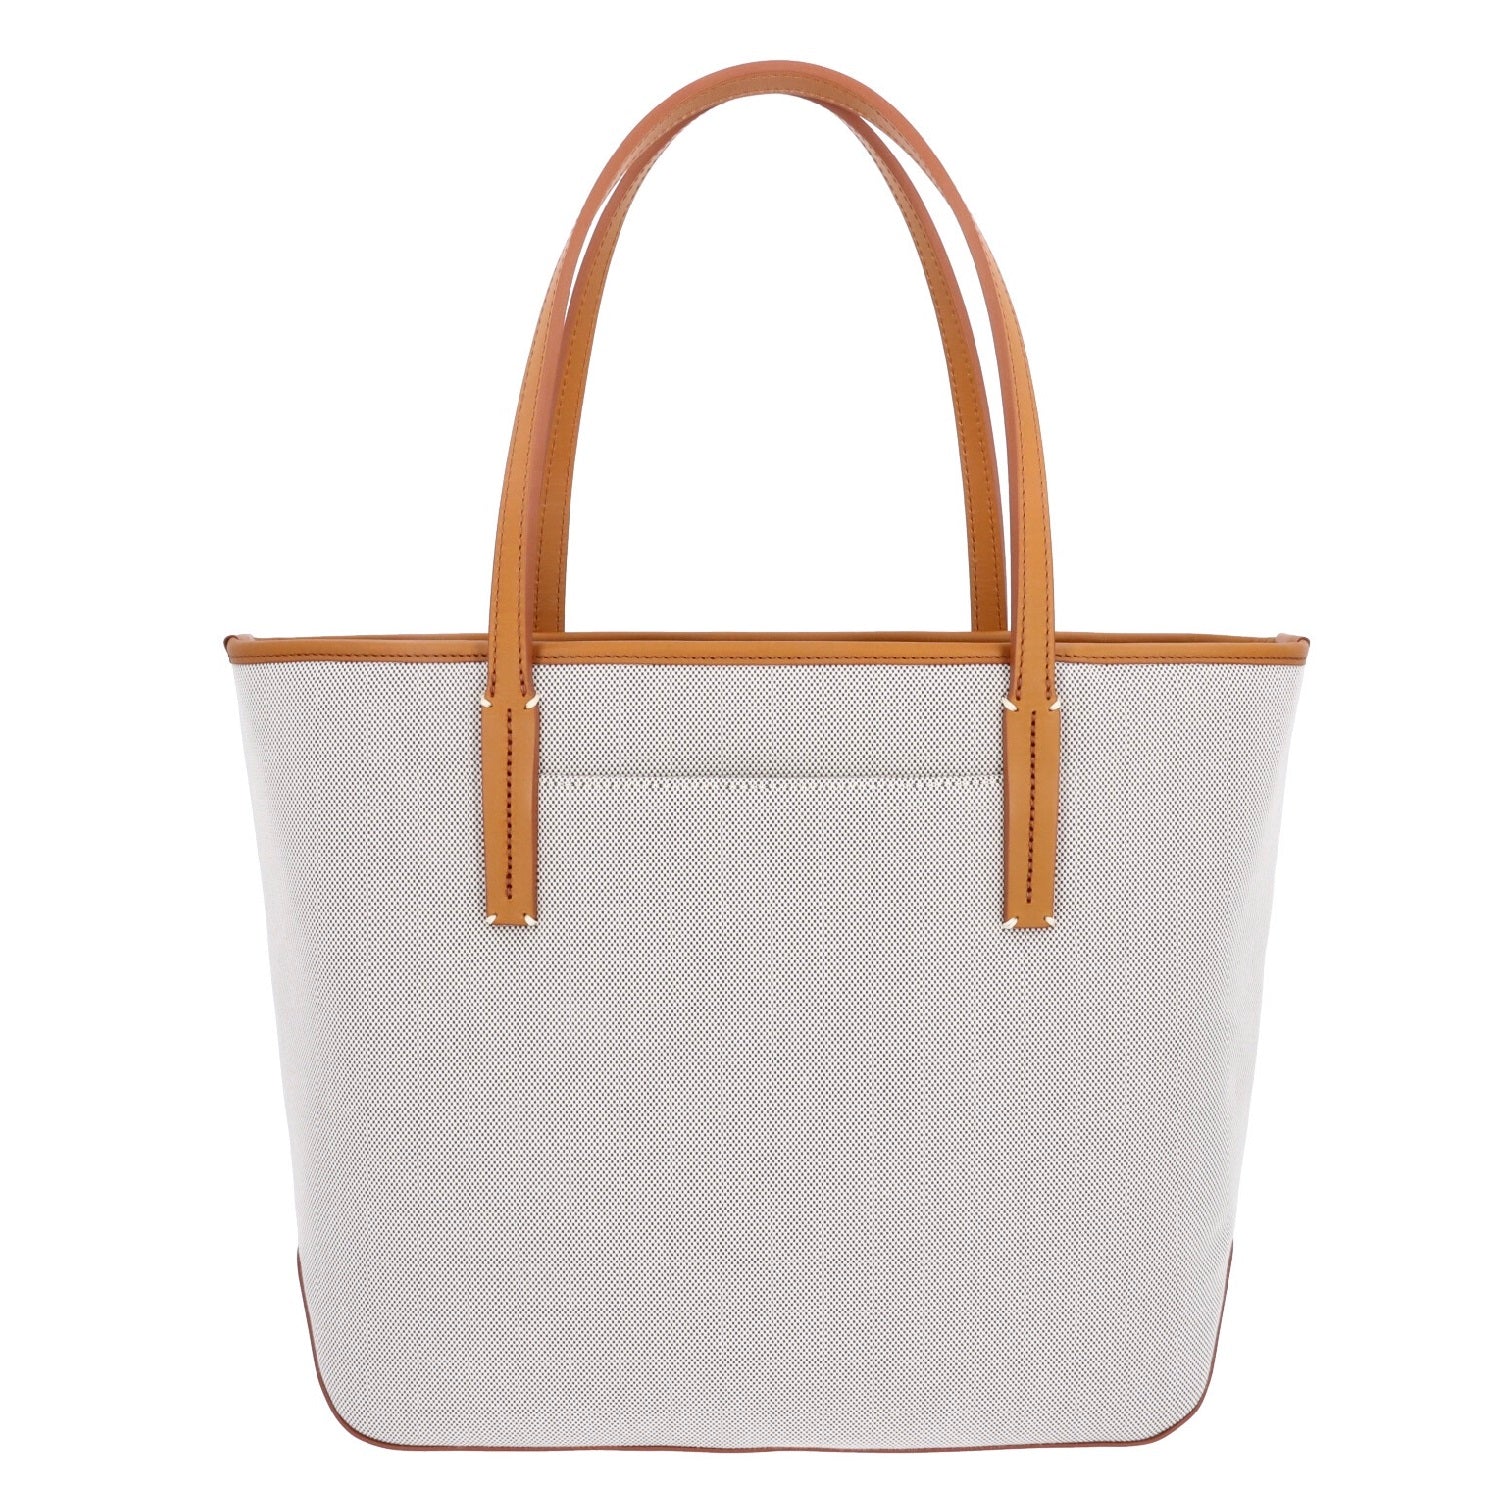 For the blue canvas tote camel